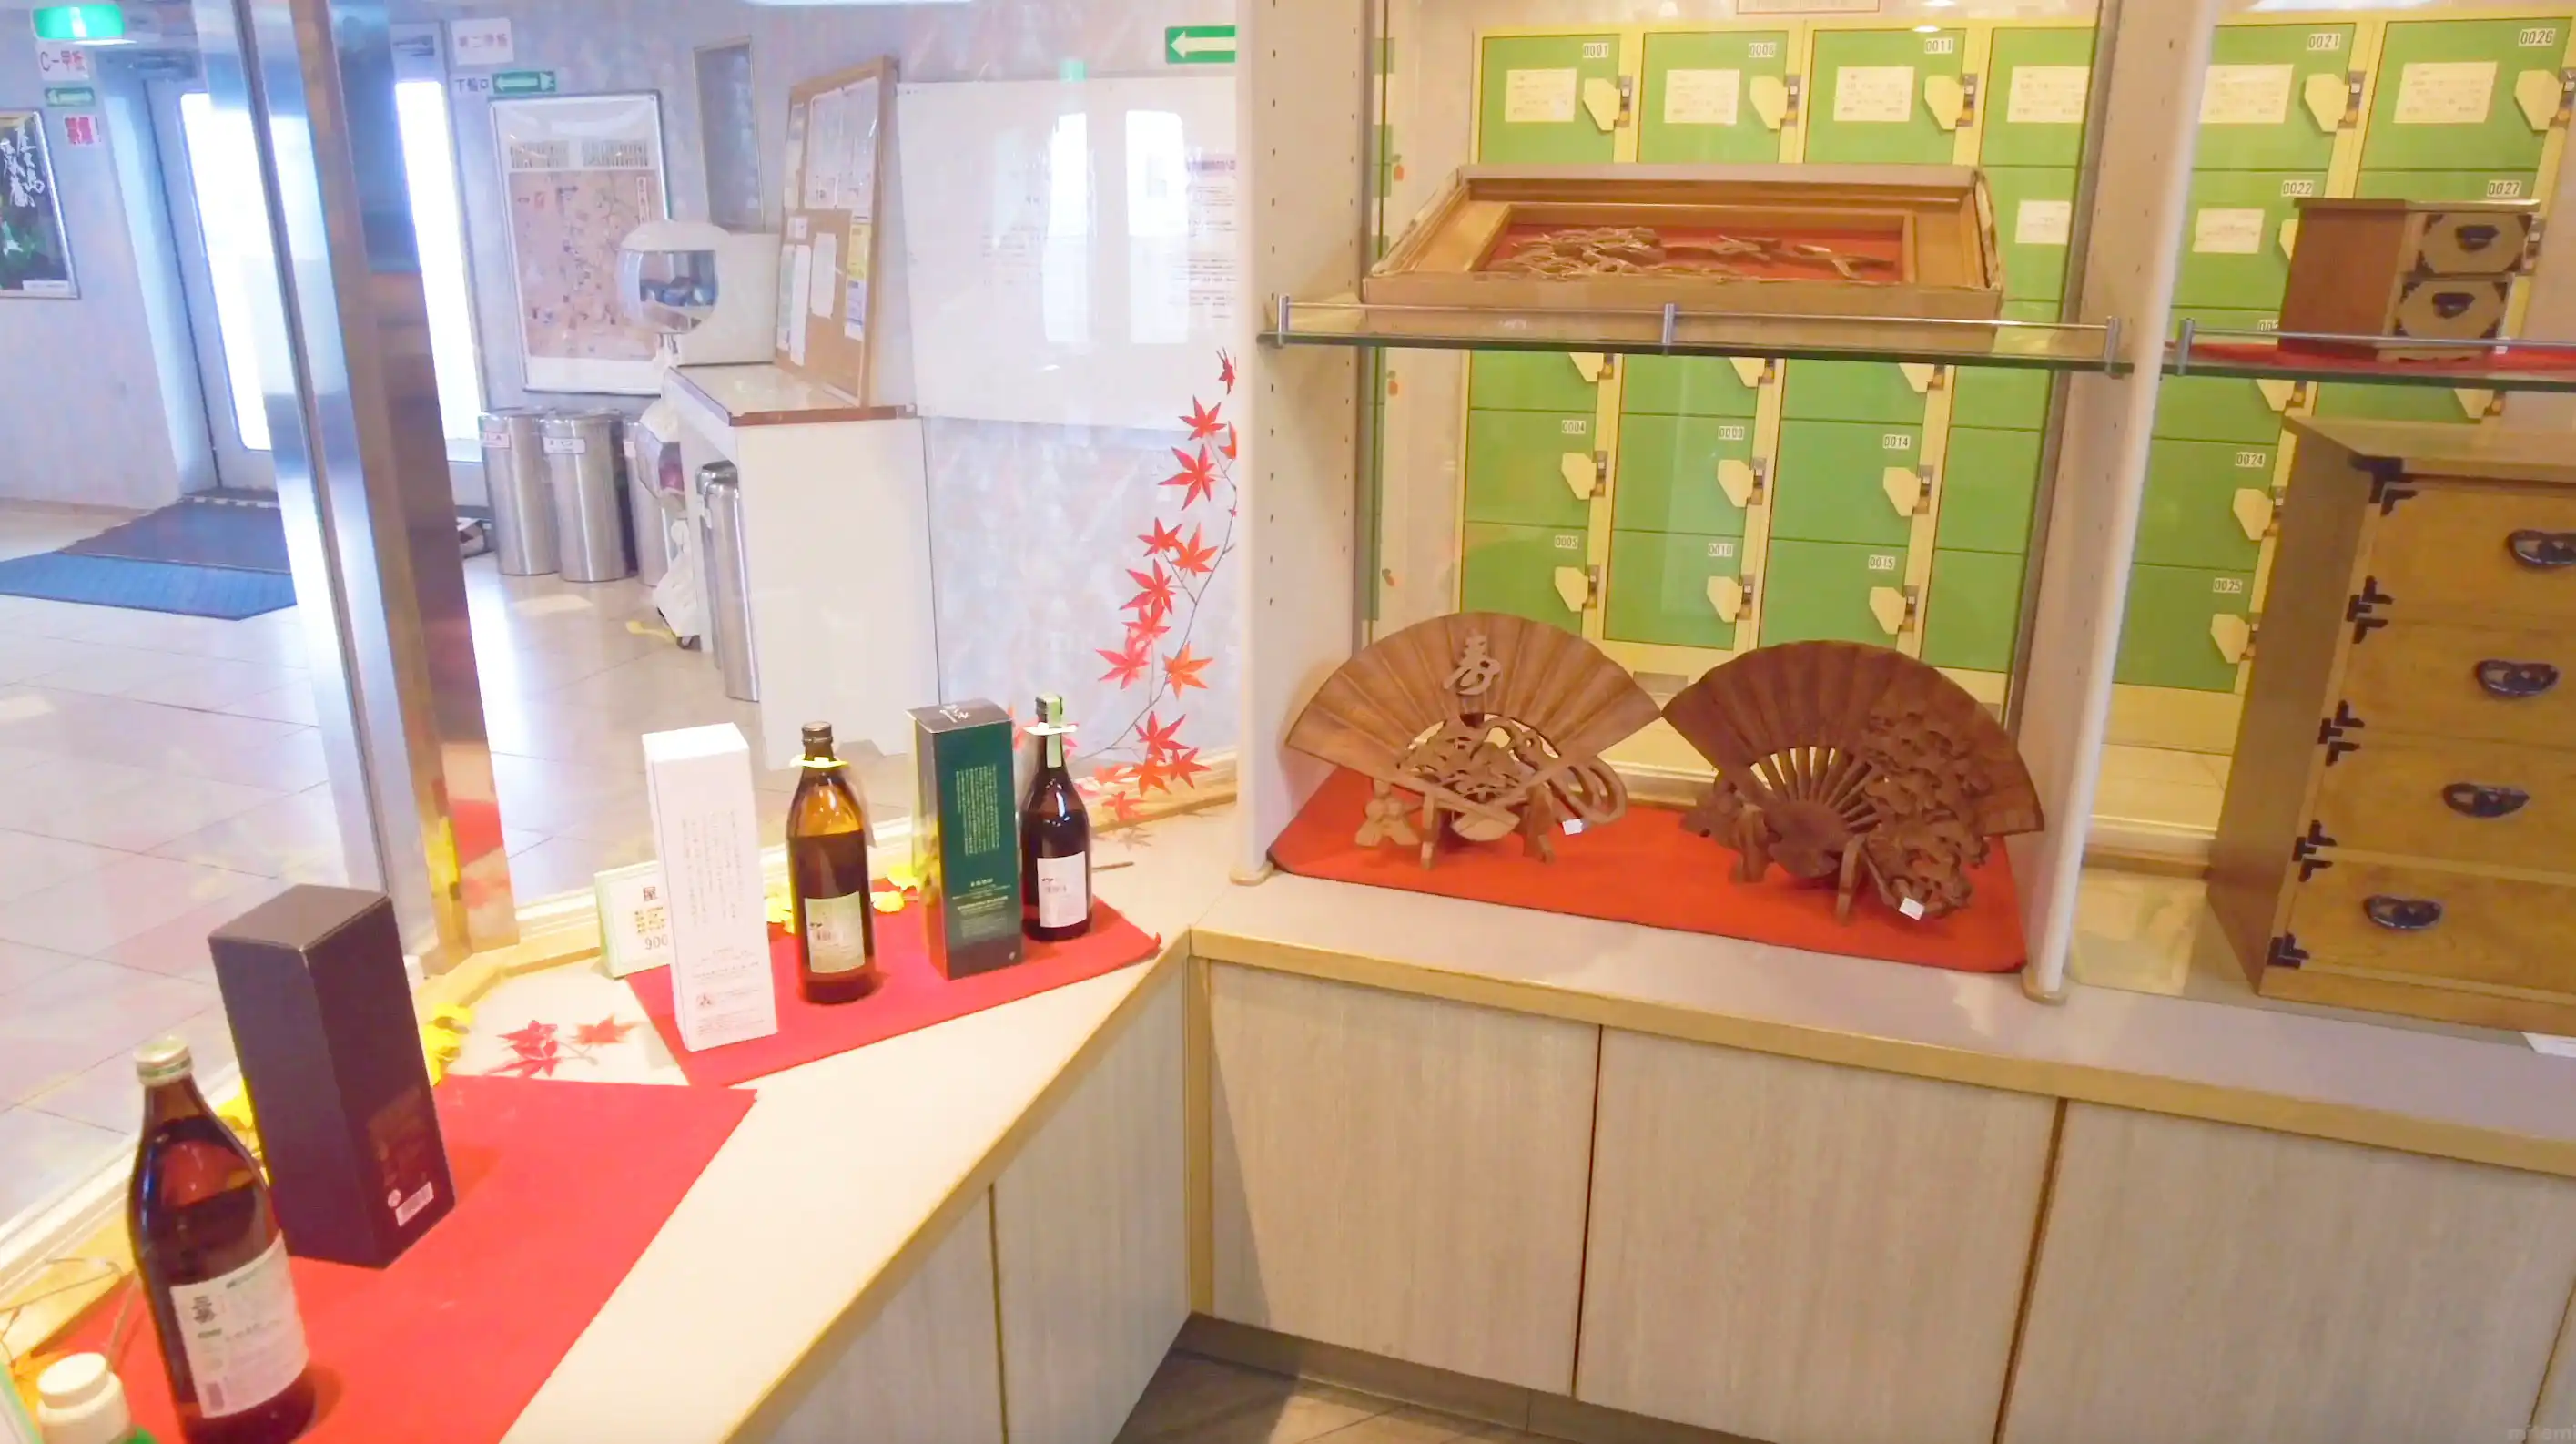 Local specialties at the onboard shop of Orita Kisen Ferry Yakushima 2